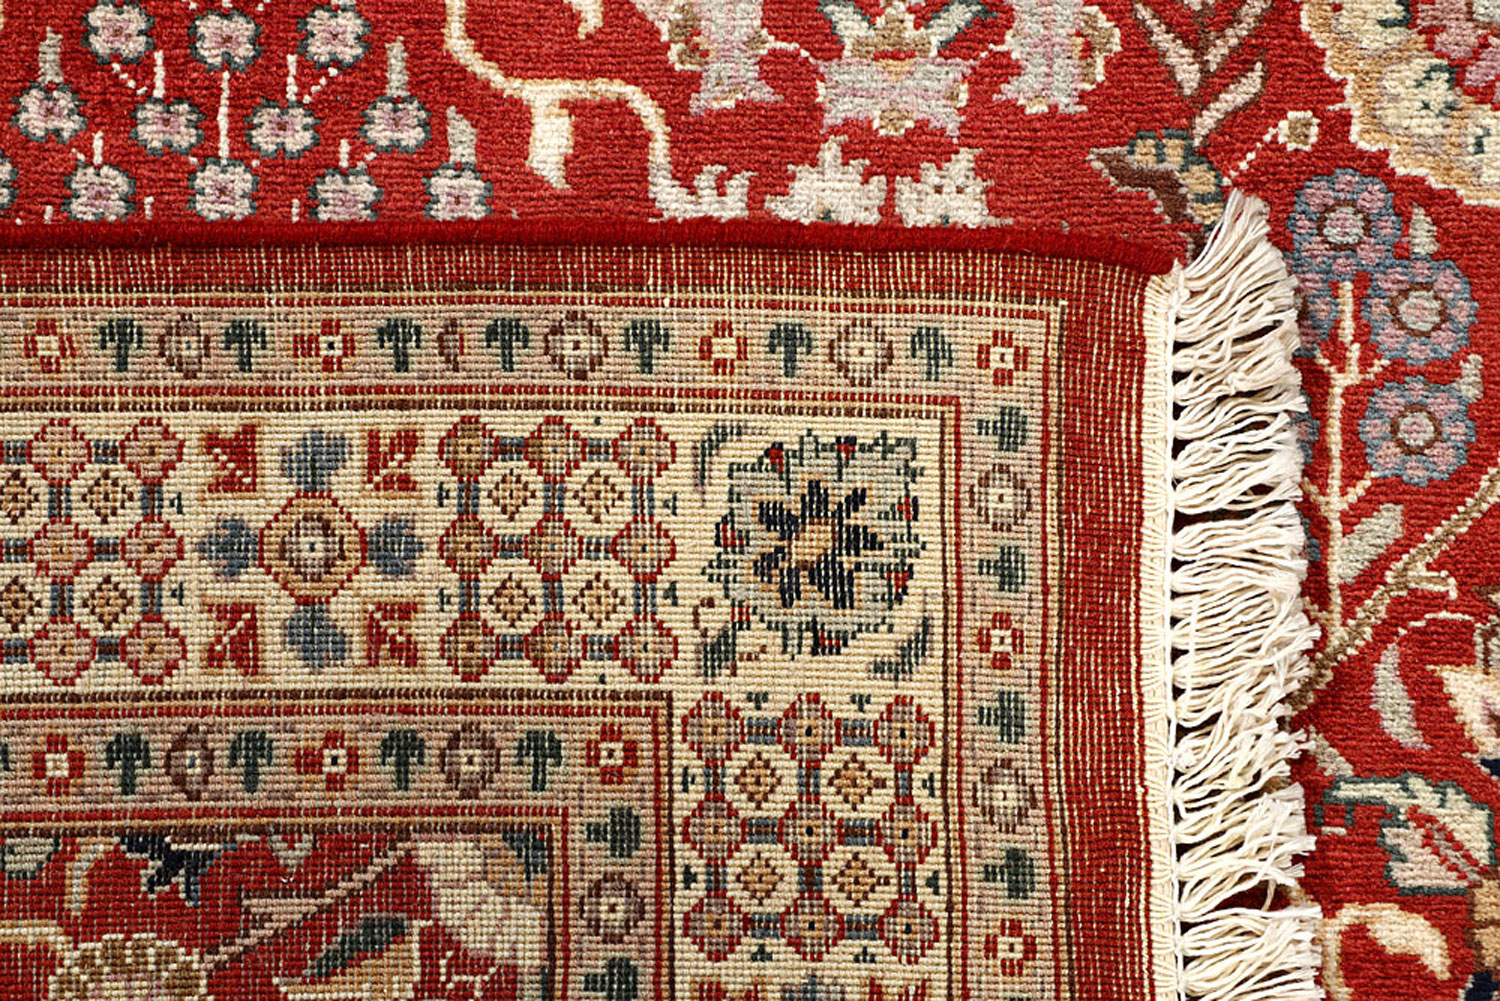 How To Clean A Polypropylene Rug